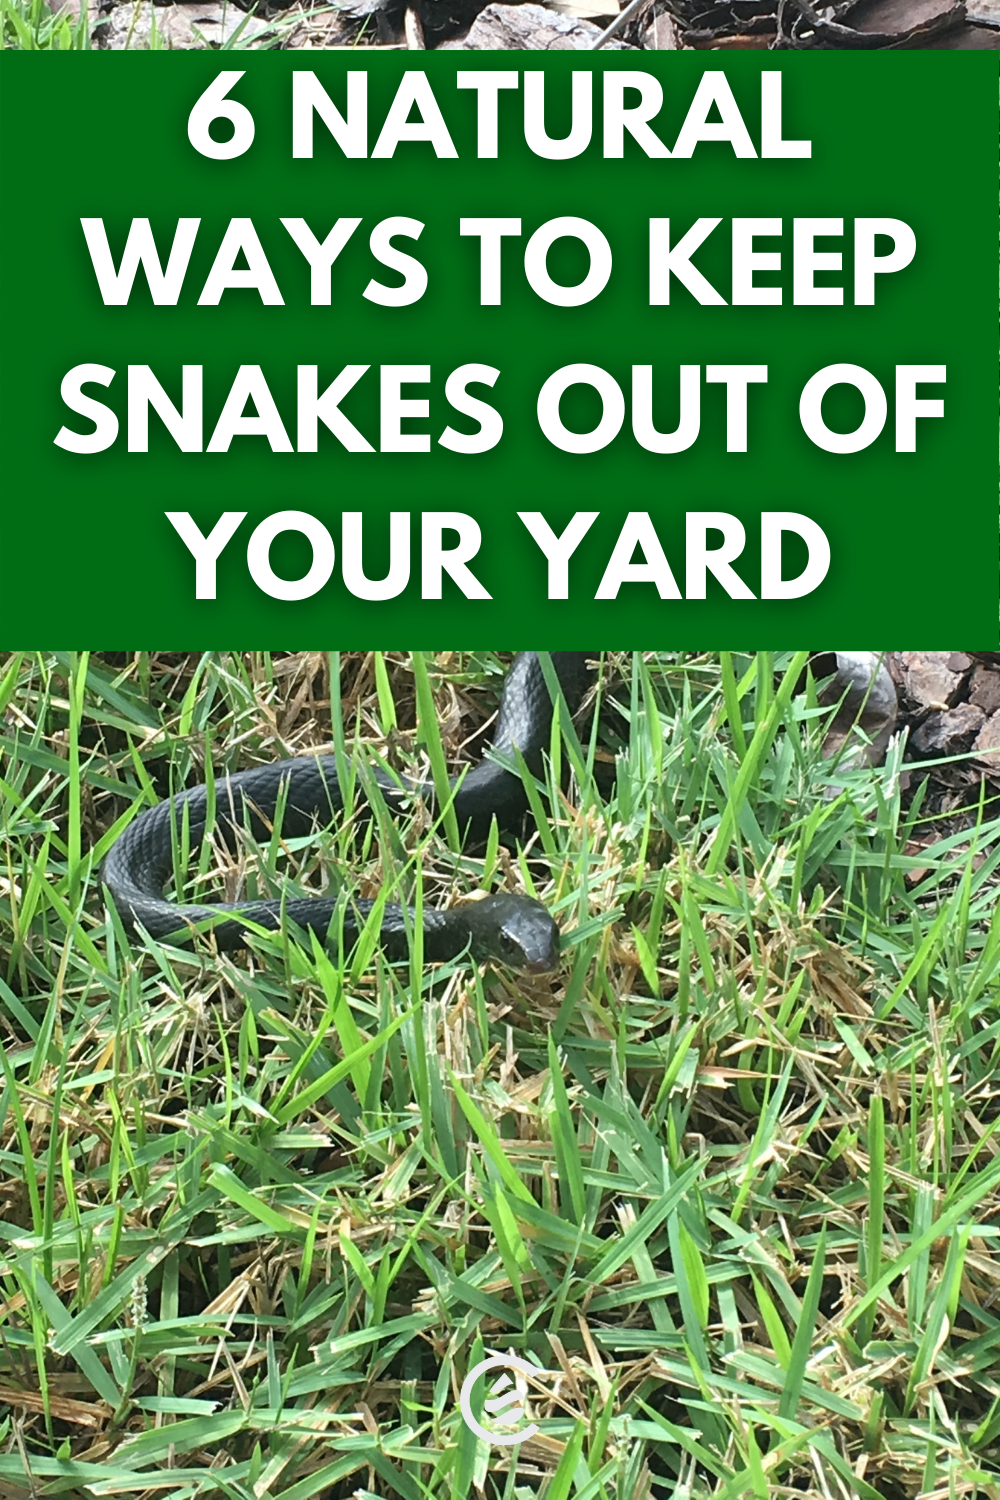 6 Tips to Keep Snakes OUT